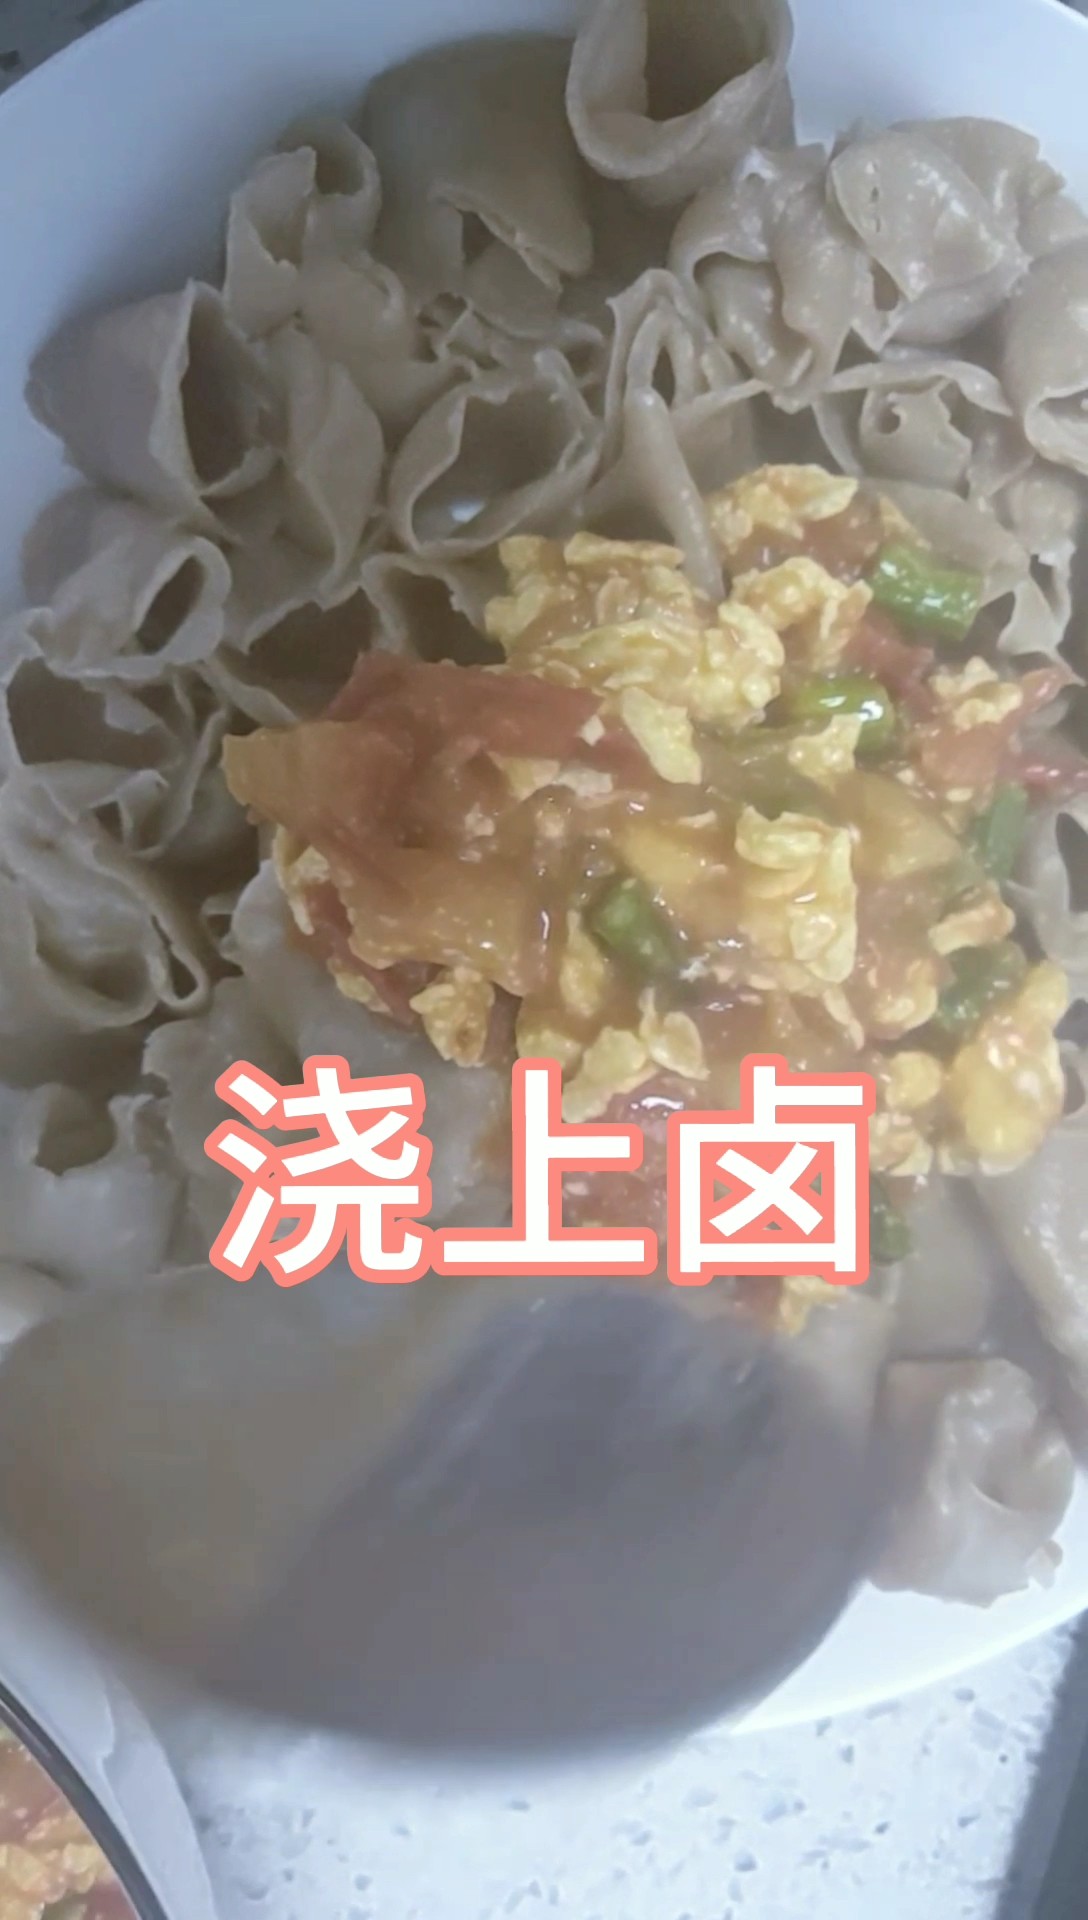 Shanxi Noodles and Castanopsis recipe